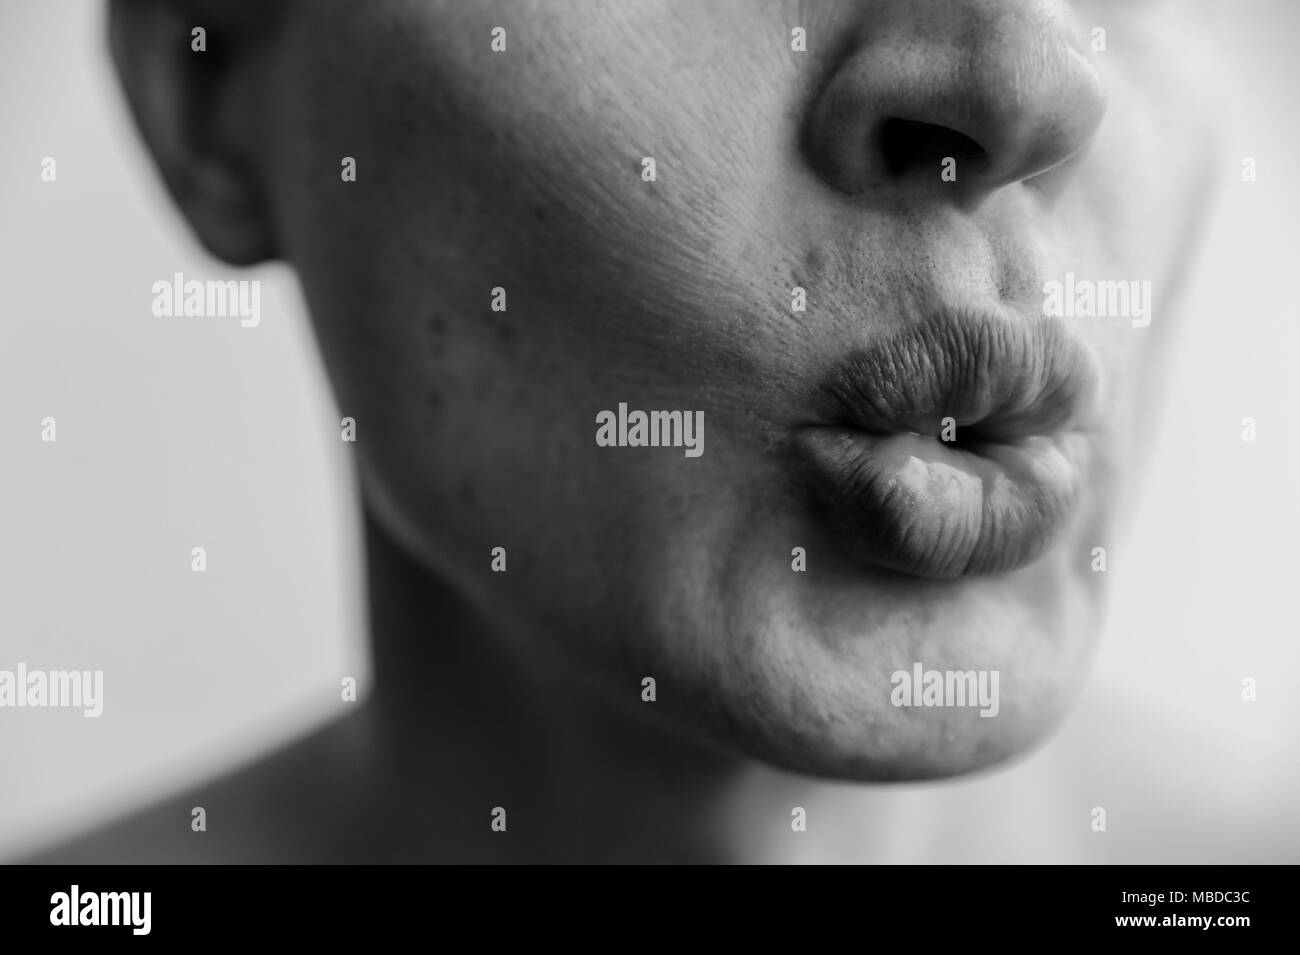 Lips ready for kiss. The lower part of the face of a man  closeup. Black and white images. Stock Photo